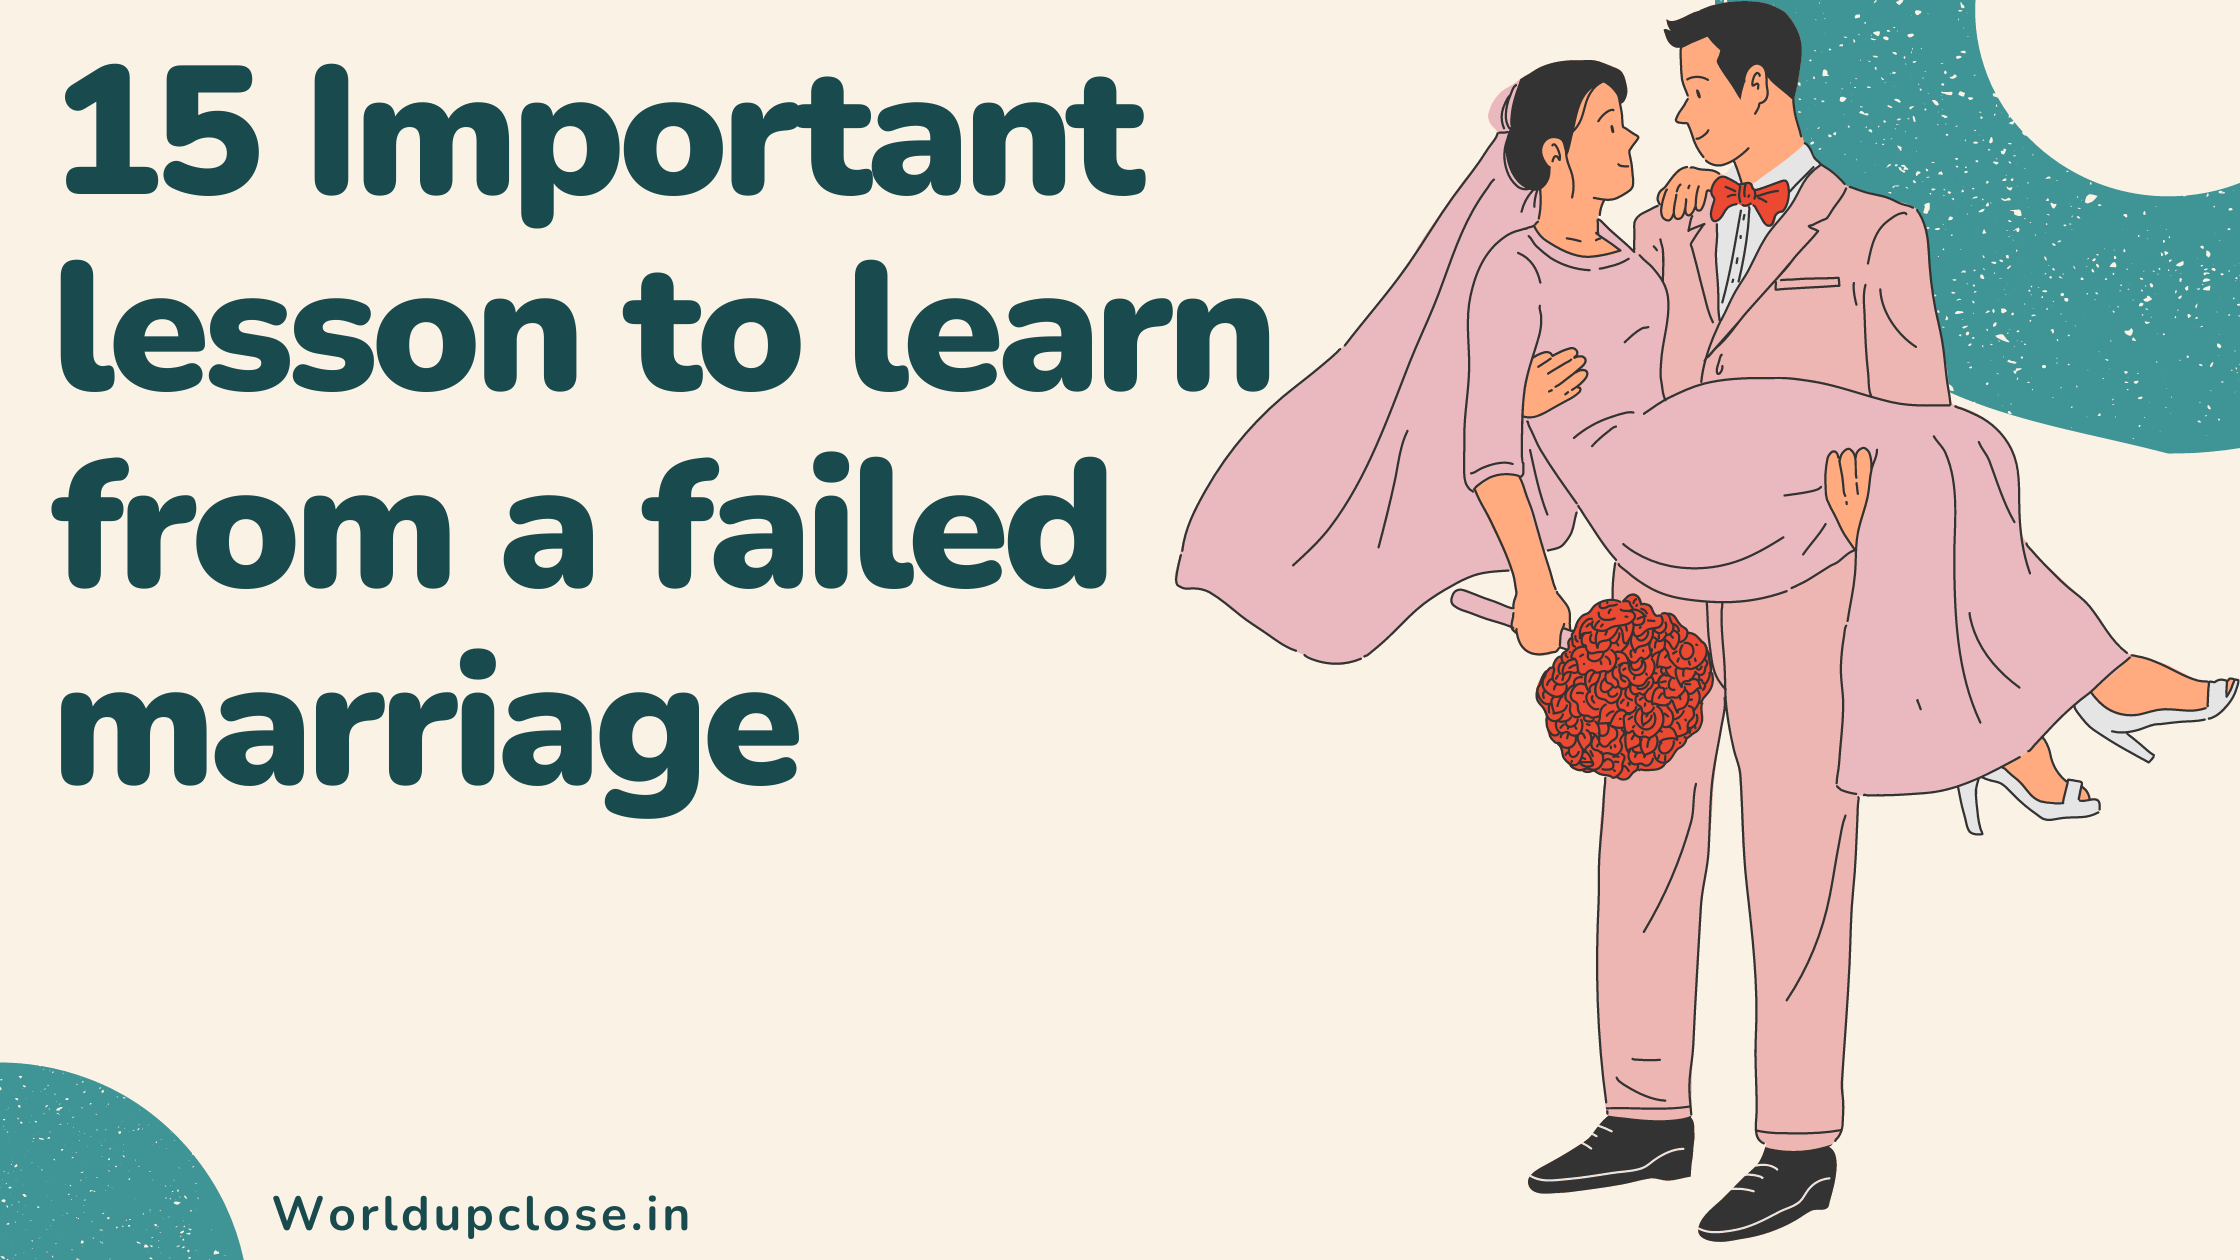 15 Important lesson to learn from a failed marriage 19